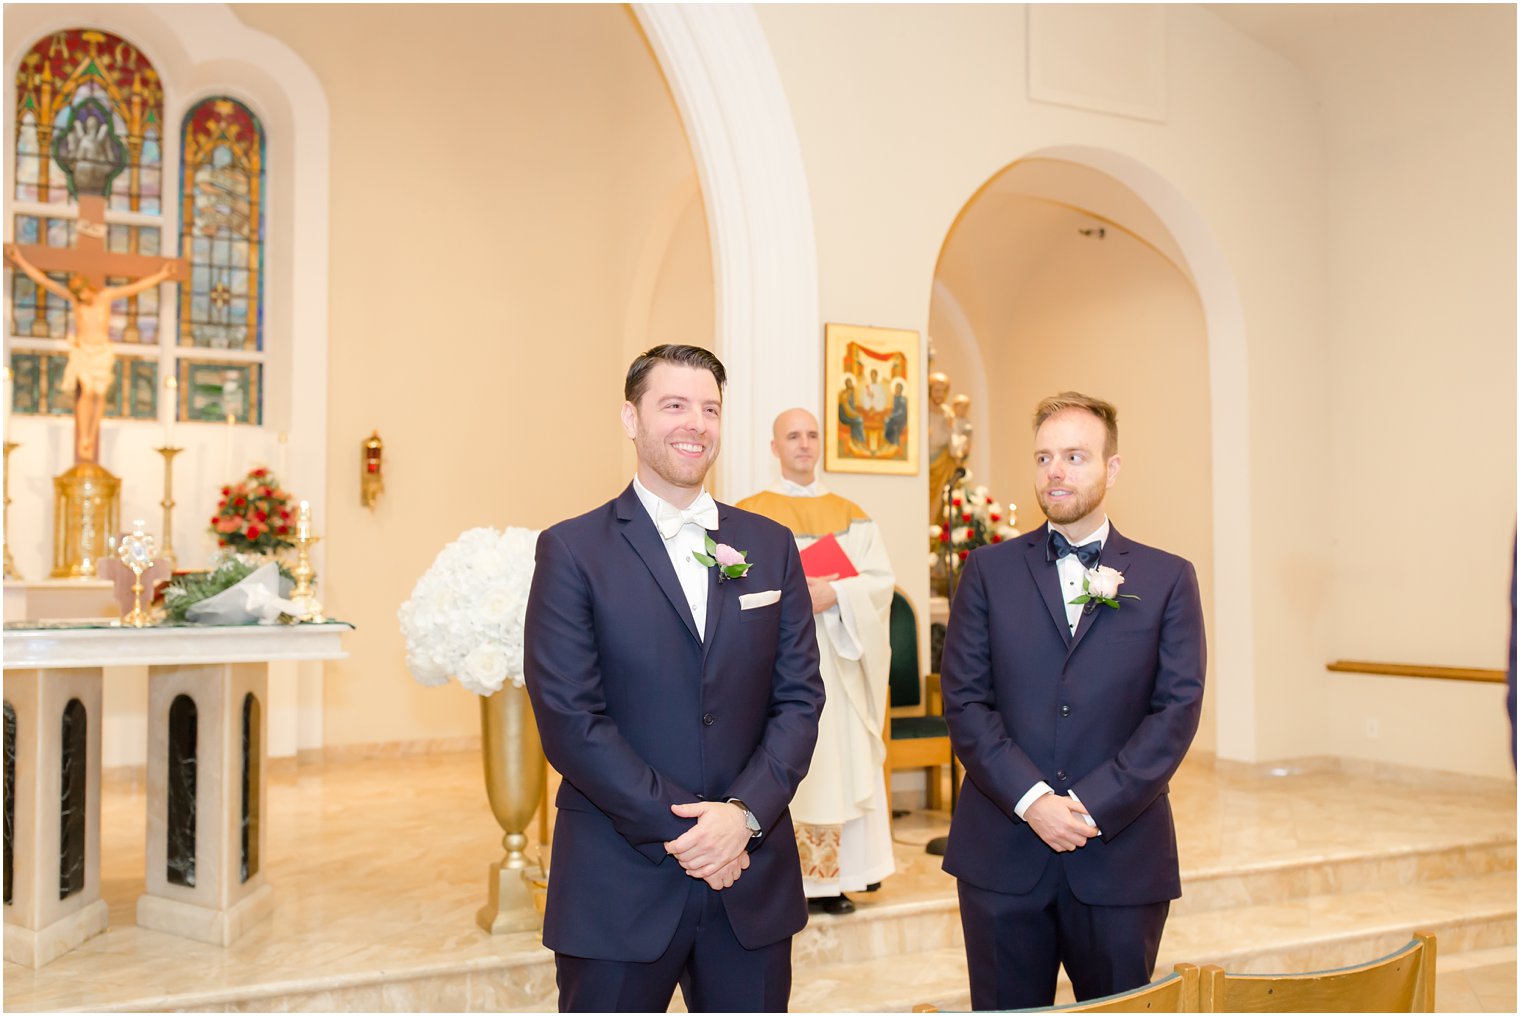 Groom seeing bride for the first time on wedding day